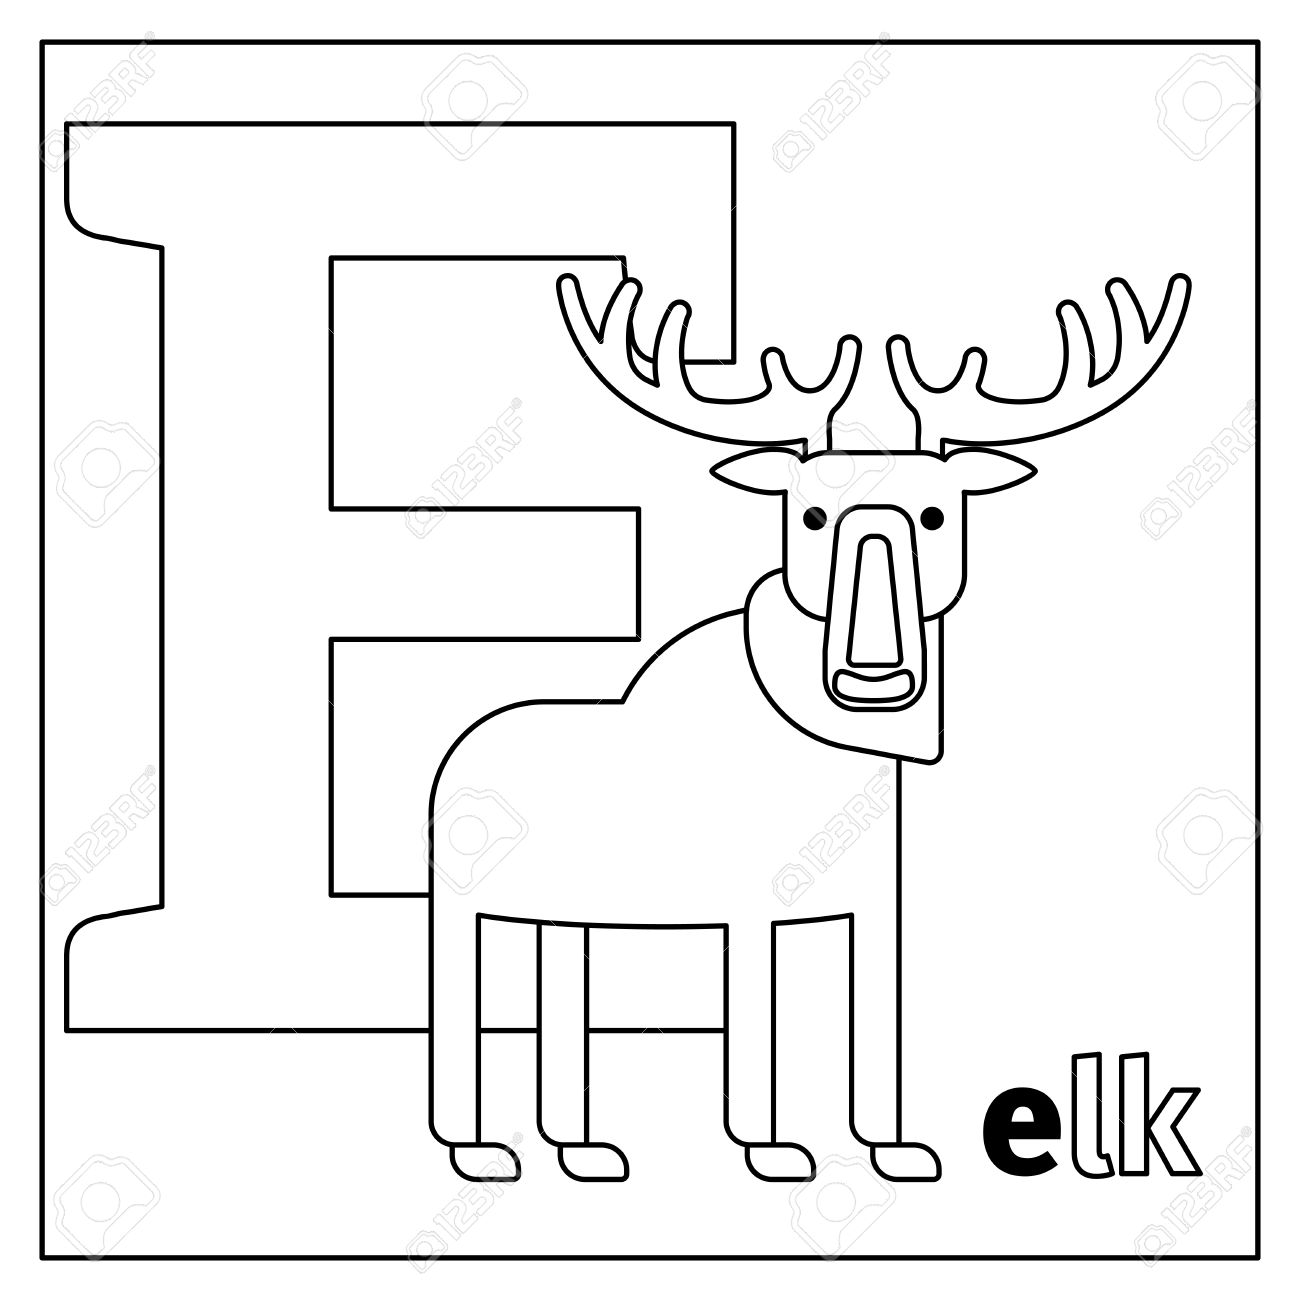 Coloring page or card for kids with english animals zoo alphabet elk letter e vector illustration royalty free svg cliparts vectors and stock illustration image